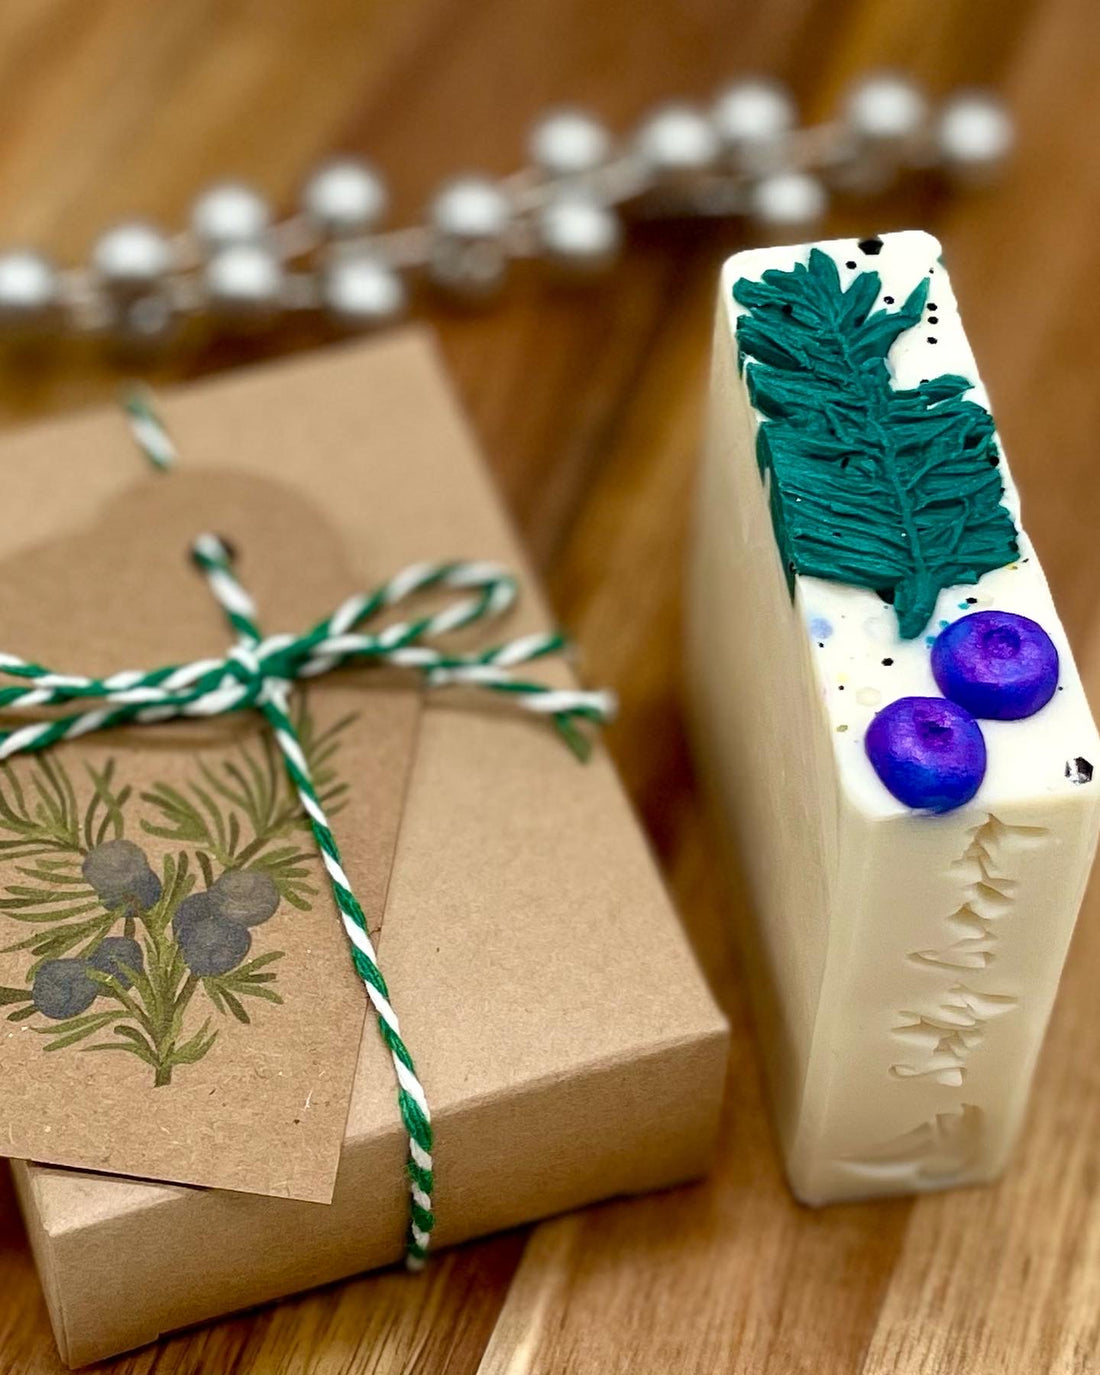 Top 5 Reasons Why Handmade Soap Makes the Best Gift